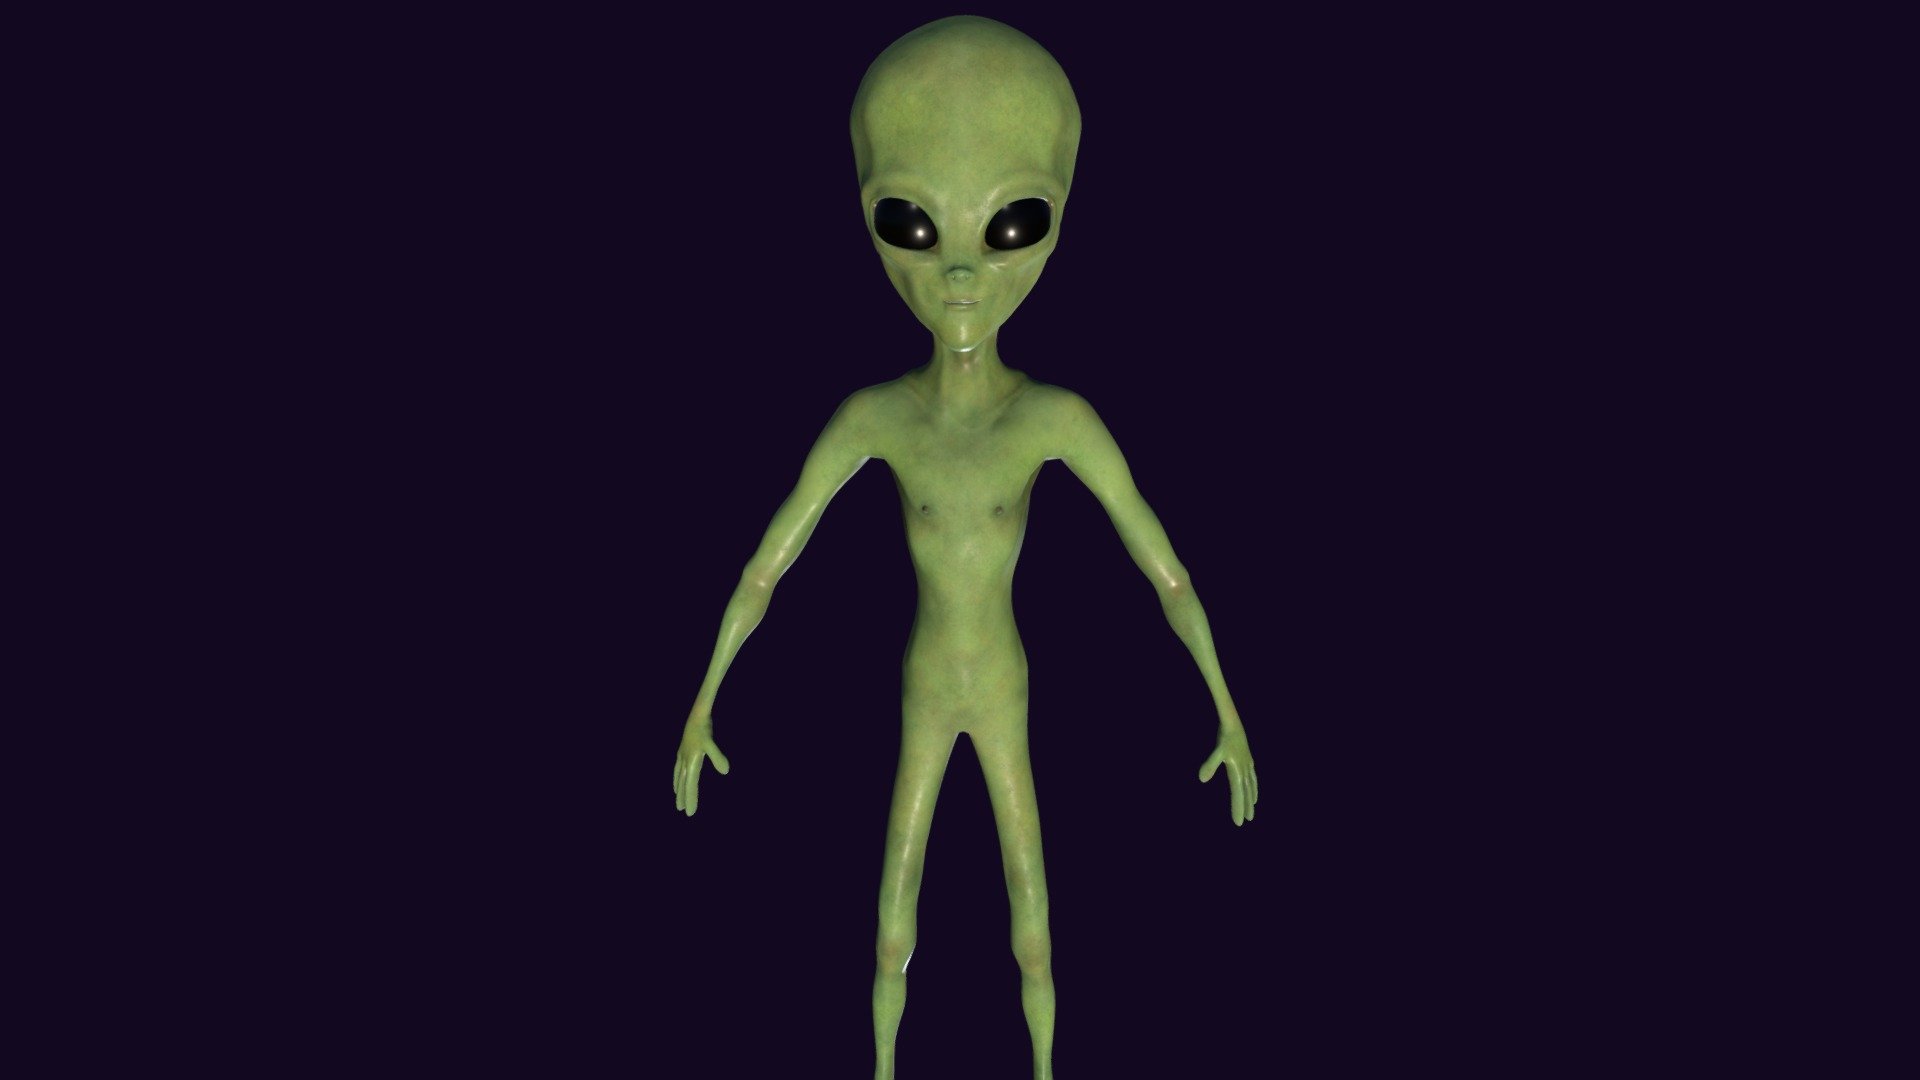 Low Poly Alien made In Blender, texturized Substance Painter. All Textures, materials and HDRI are included.

-Blender Project (Lowpoly)

-4k Texture Folder

-OBJ (Lowpoly and Highpoly version)

Extraterrestre hecho enBlender, texturizado con Substance Painter. Todas las texturas, materiales y HDRI vienen incluidas.

IMPORTANT!!

Not to be used in NFT's No usar para NFTs - Realistic Alien Lowpoly - 3D model by DrFeelgood (@dr.feelgood) 3d model